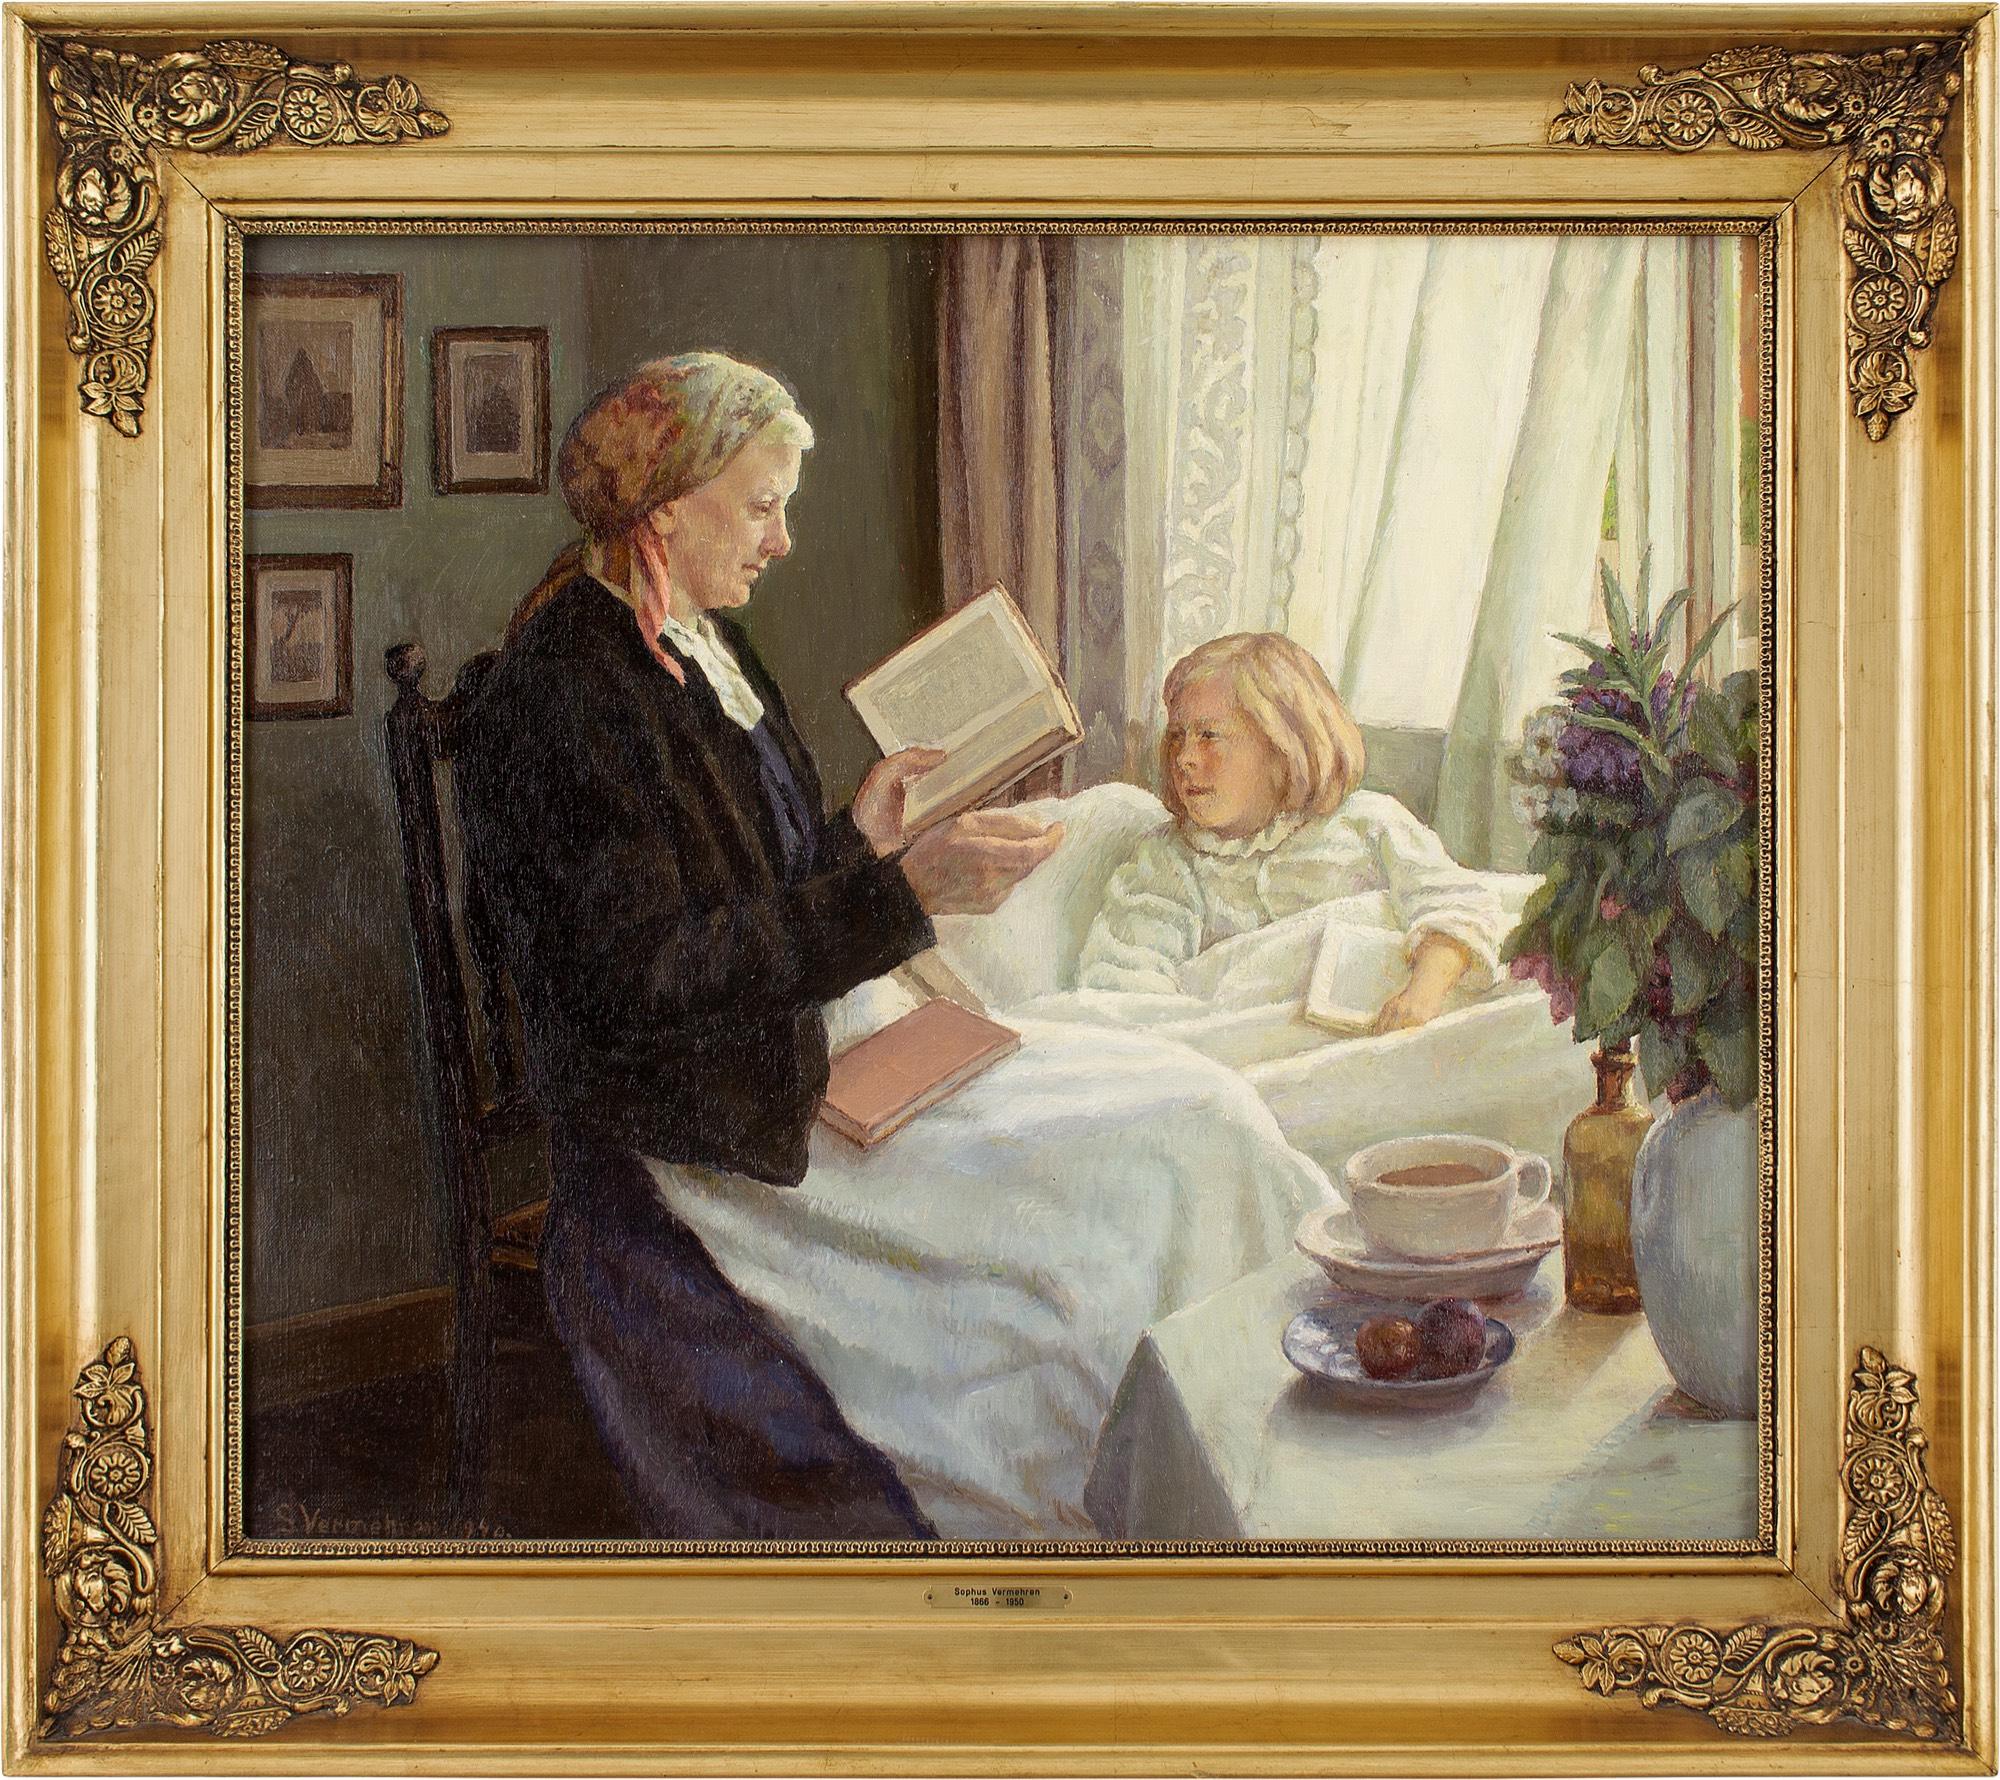 This mid-20th-century oil painting by Danish artist Sophus Vermehren (1866-1950) depicts a grandmother reading to her granddaughter, who is convalescing. It’s a sensitive portrayal, which captures a gentle family moment.

Sophus Vermehren was an